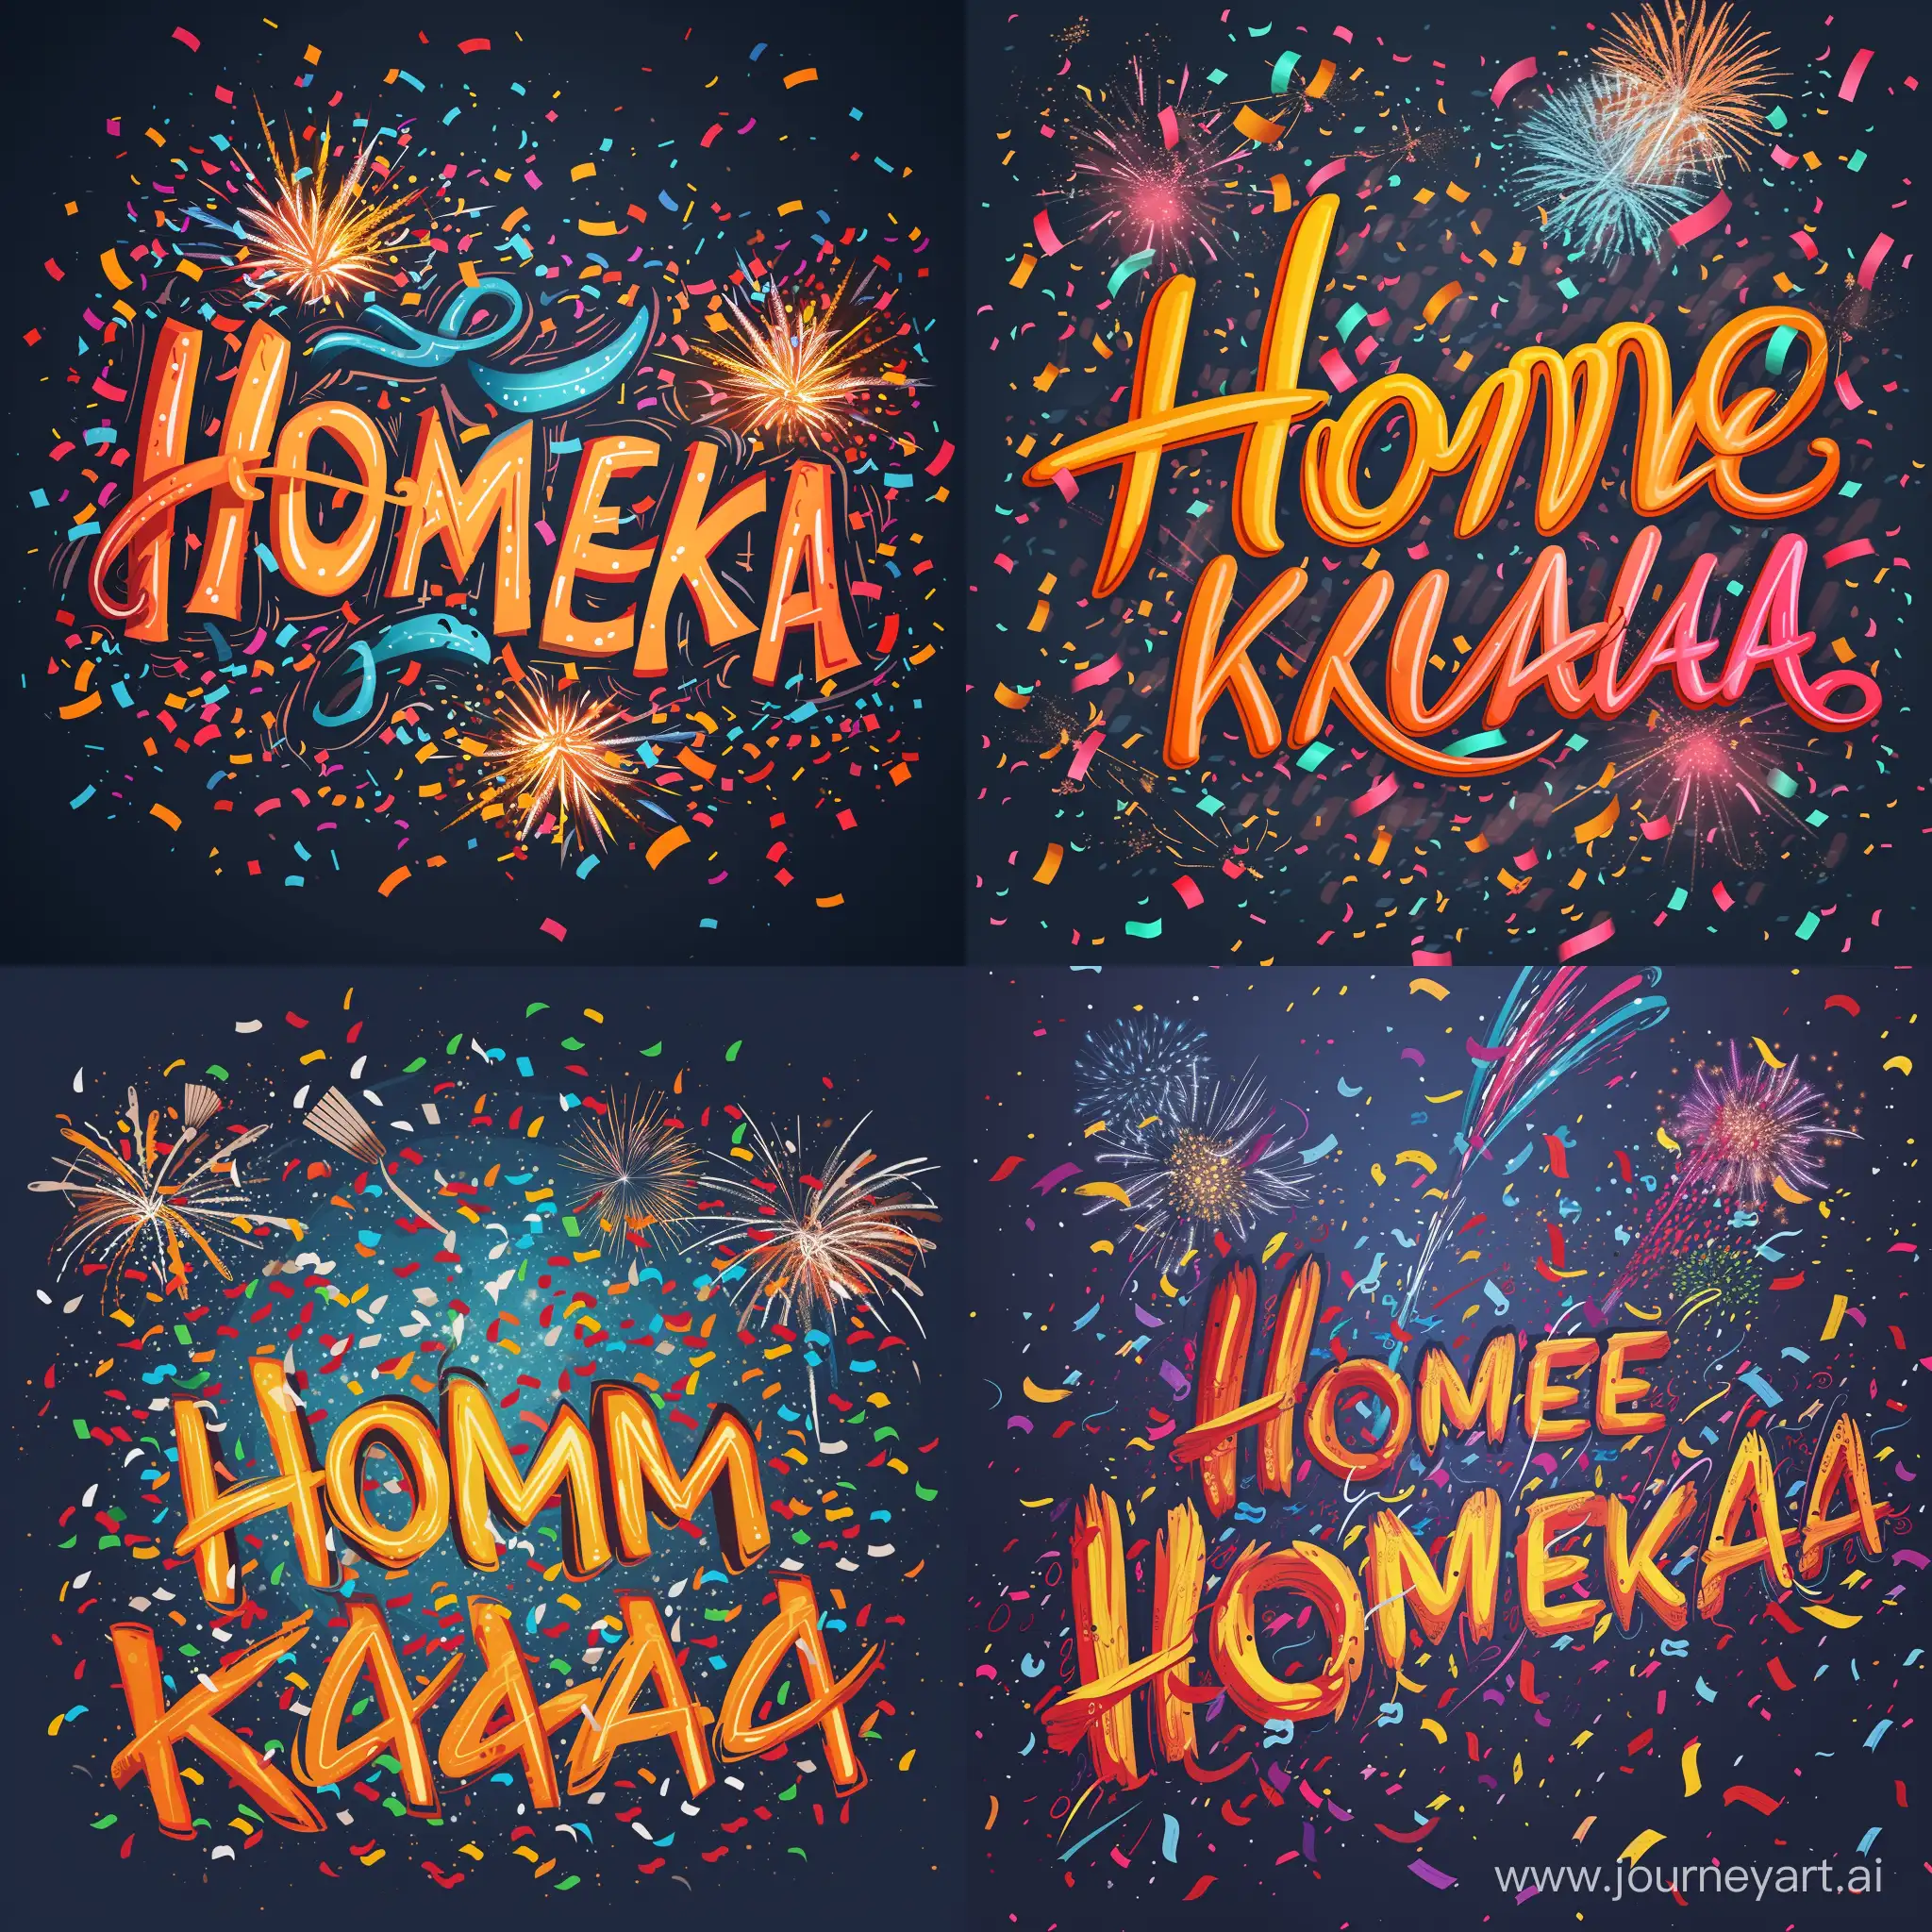 "HOMEKALA" in script calligraphy, surrounded by confetti and fireworks. Typography.